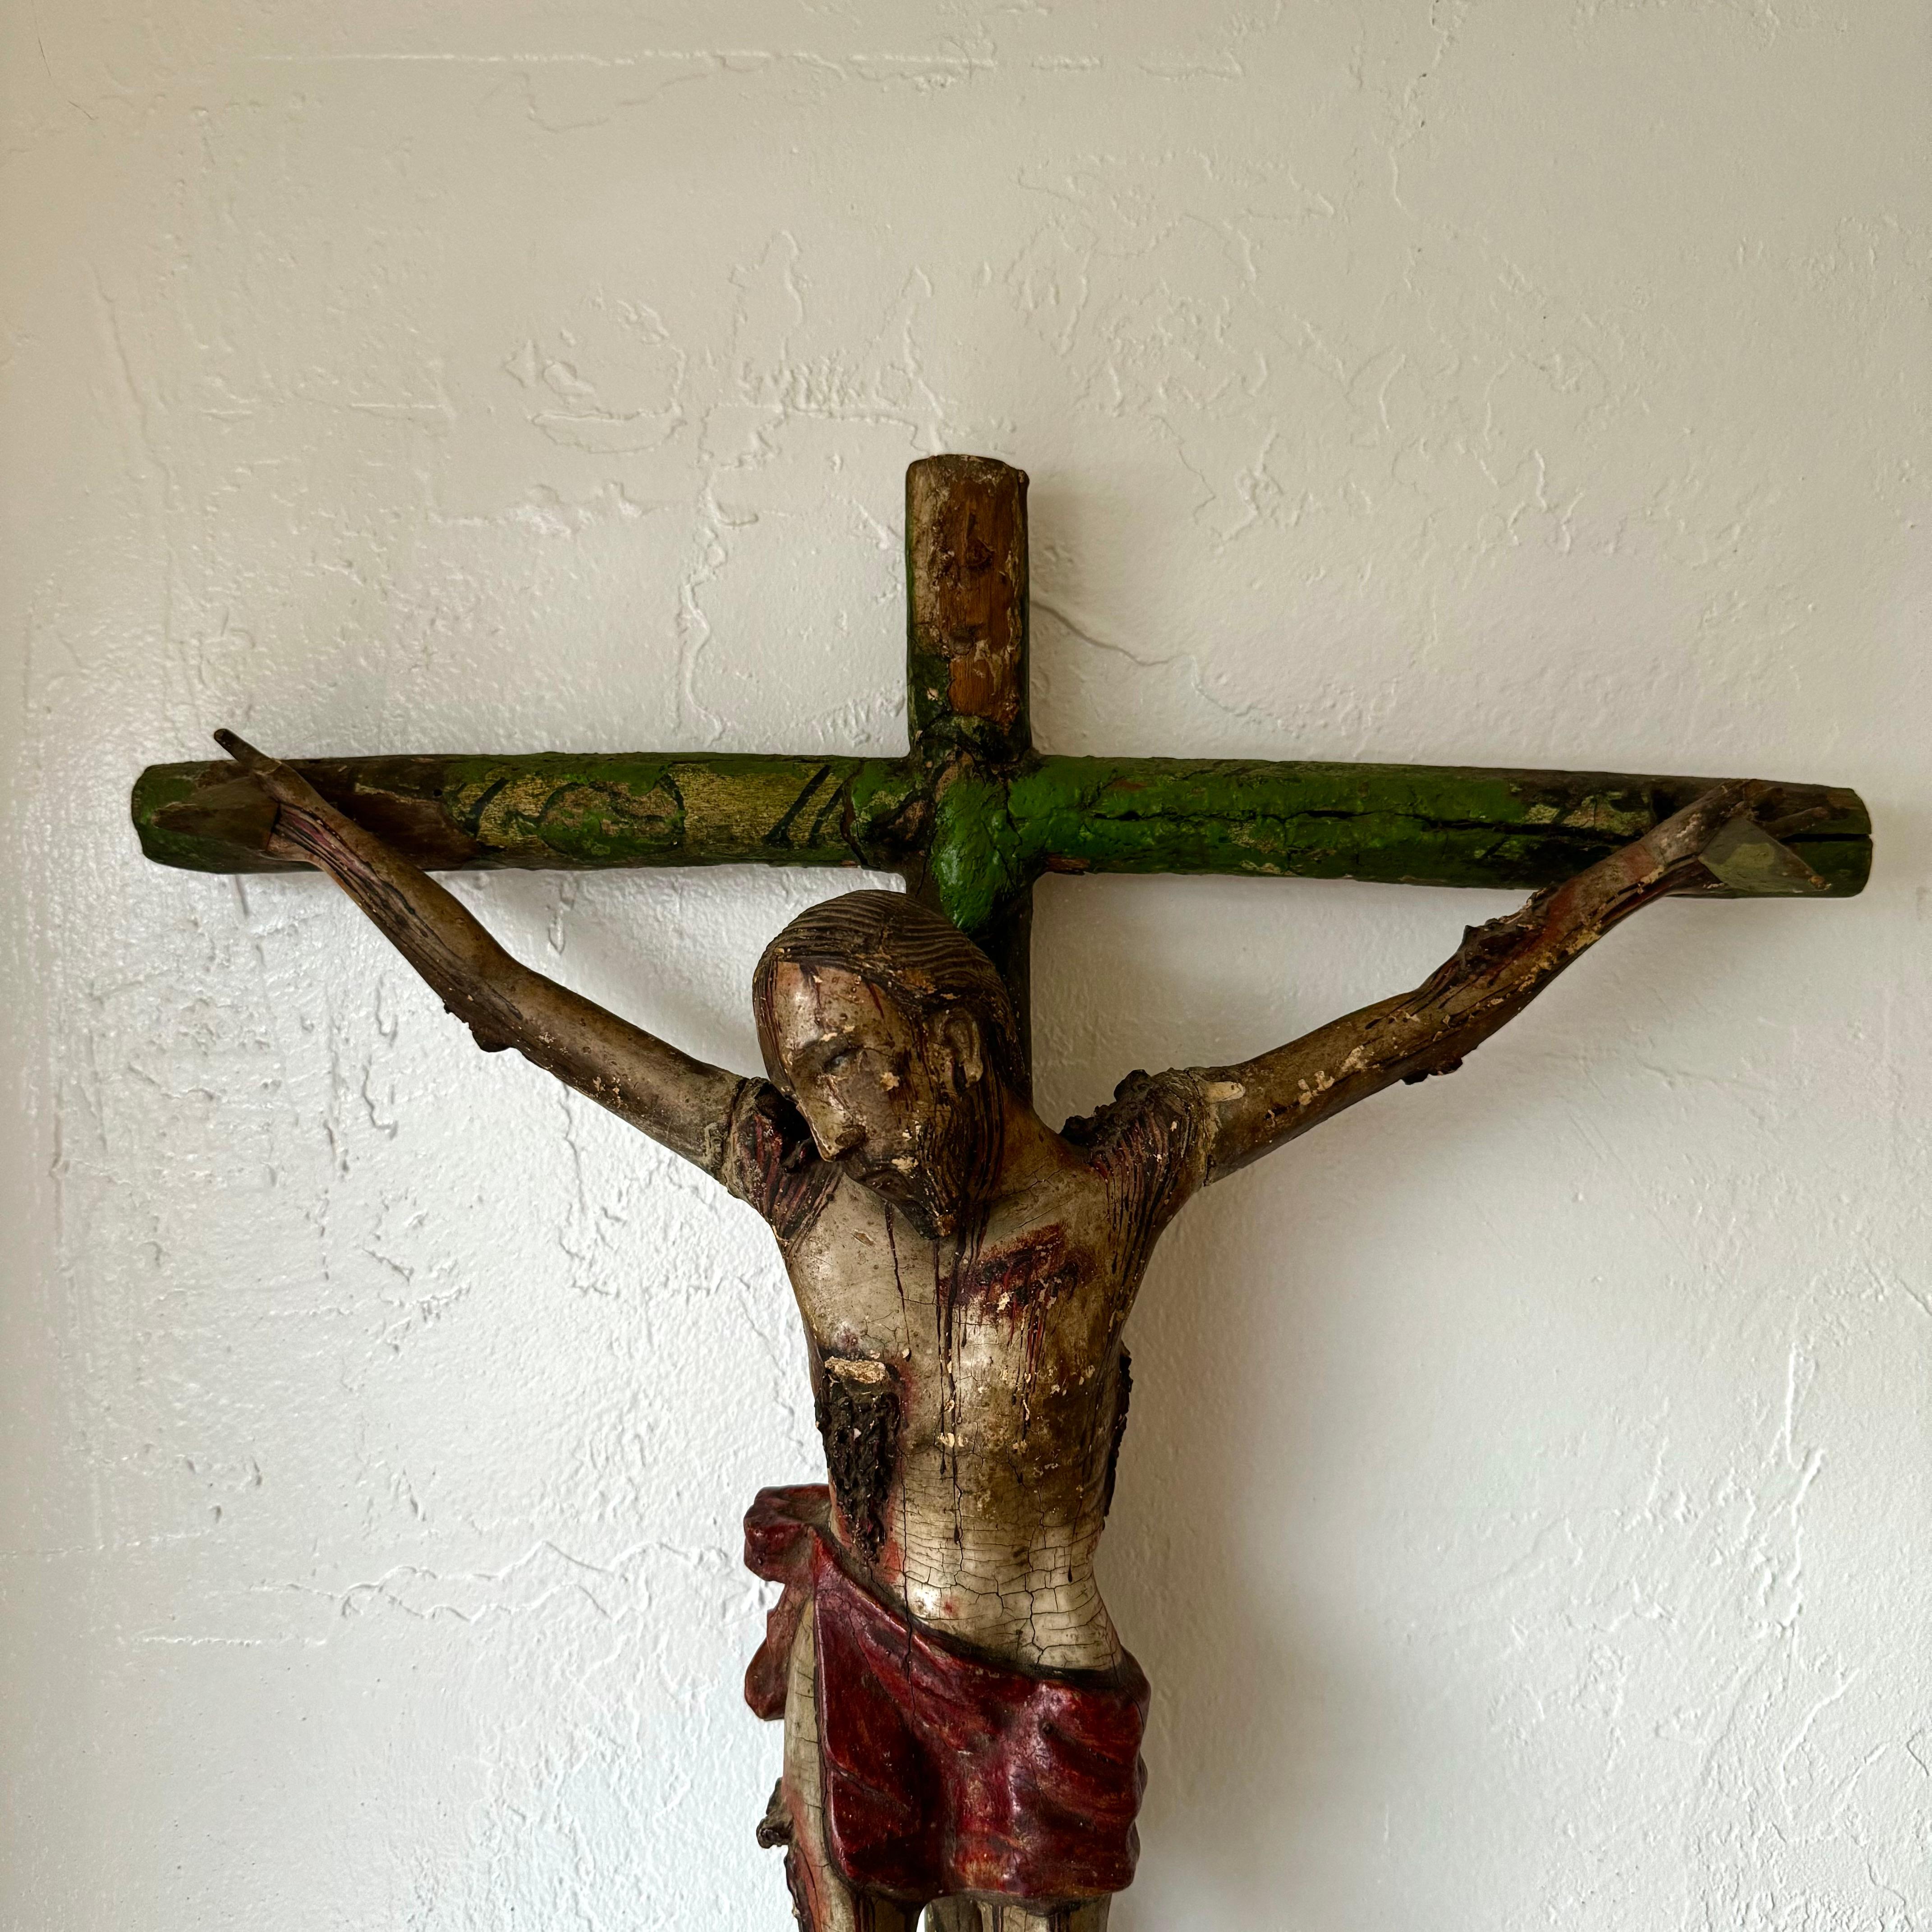 For your consideration is this beautifully carved, painted and detailed Cristo depicting Jesus nailed on the cross. I had an expert take a look at it and he believes the Jesus figure is 17th century and the cross is probably 18th or 19th century and